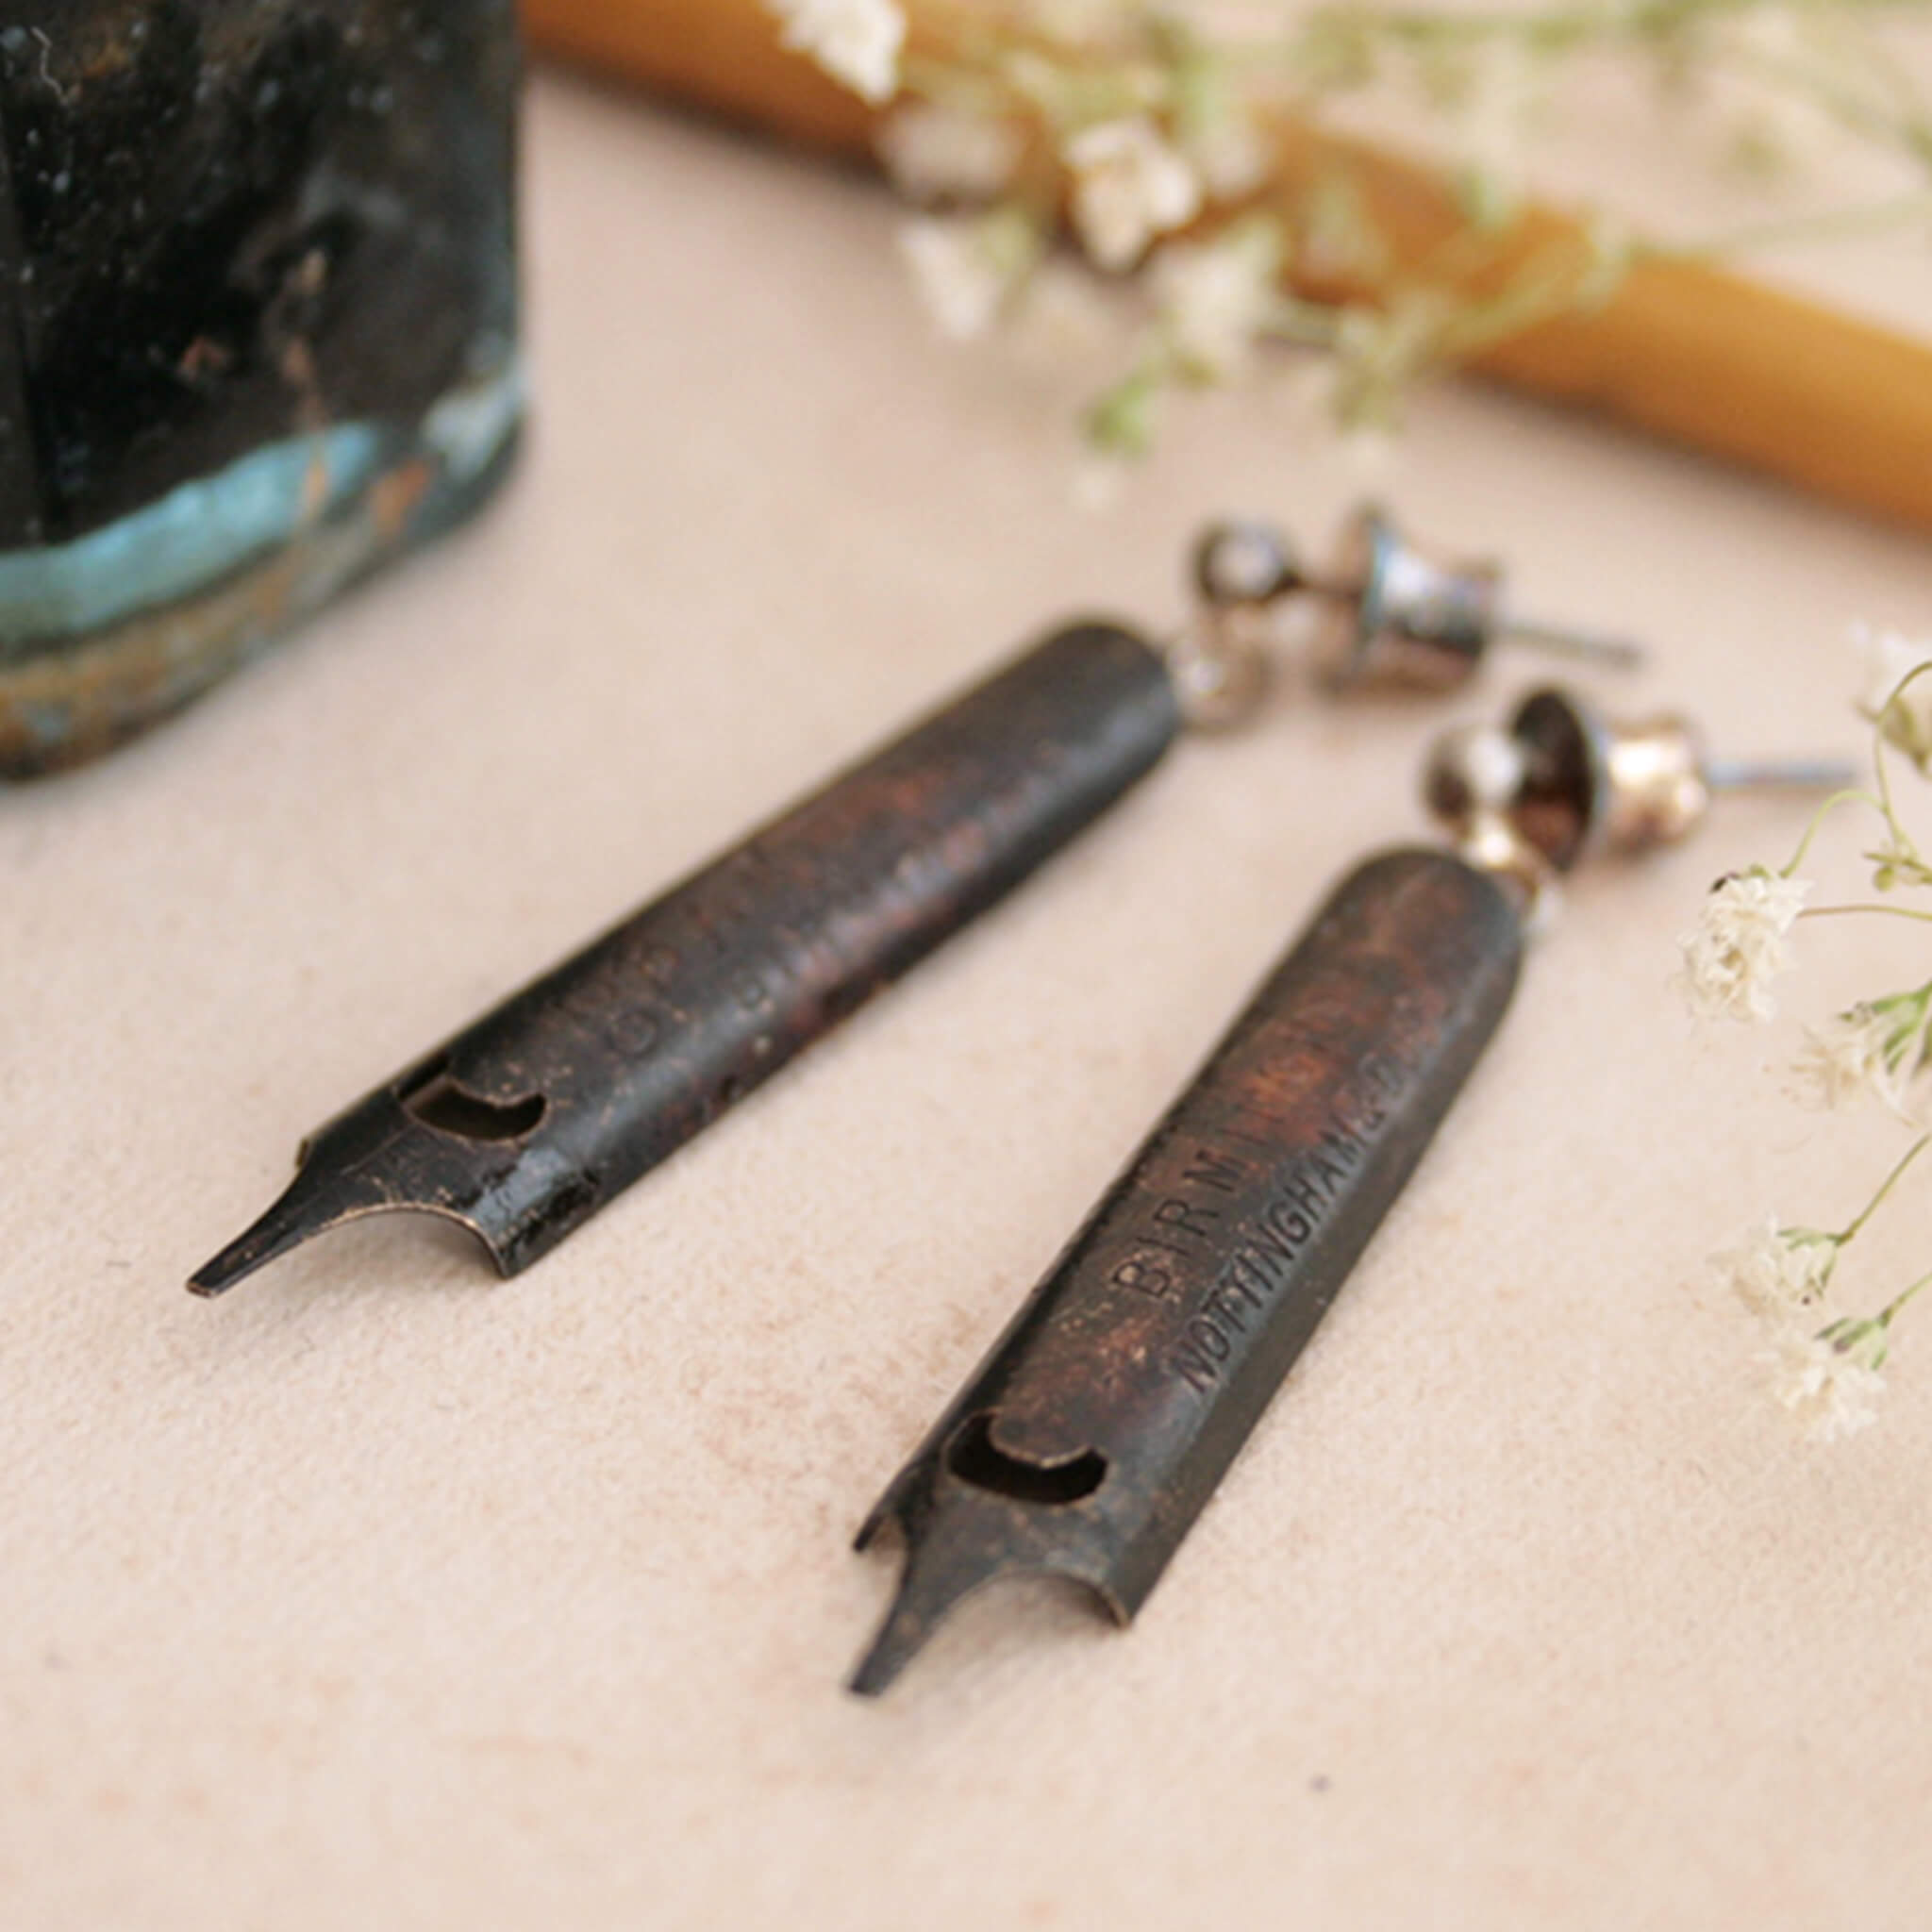 antique gold pen nib earrings covered in heavy patina lying on a coloured card